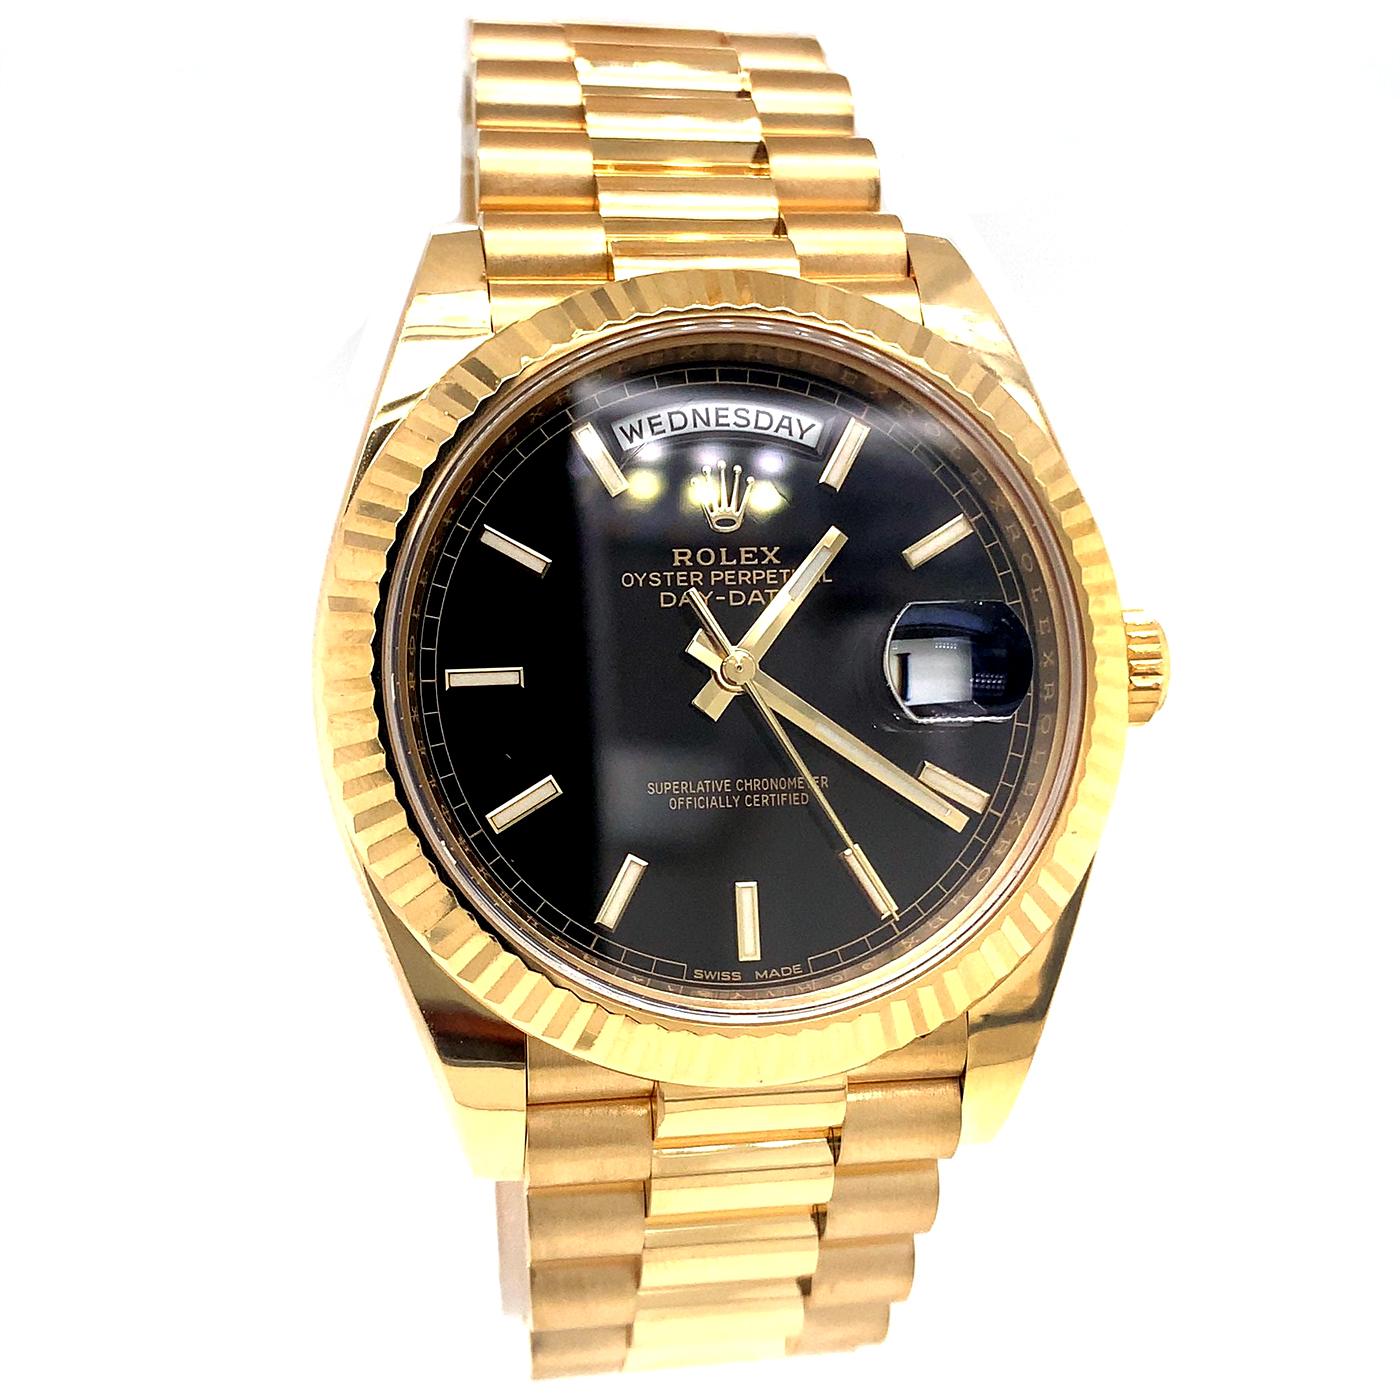 The Oyster Perpetual Day-Date 40 in 18 ct yellow gold with a Black dial, fluted bezel, and a President bracelet. The Day-Date was the first watch to indicate the day of the week spelled out in full when it was first presented in 1956. The Rolex